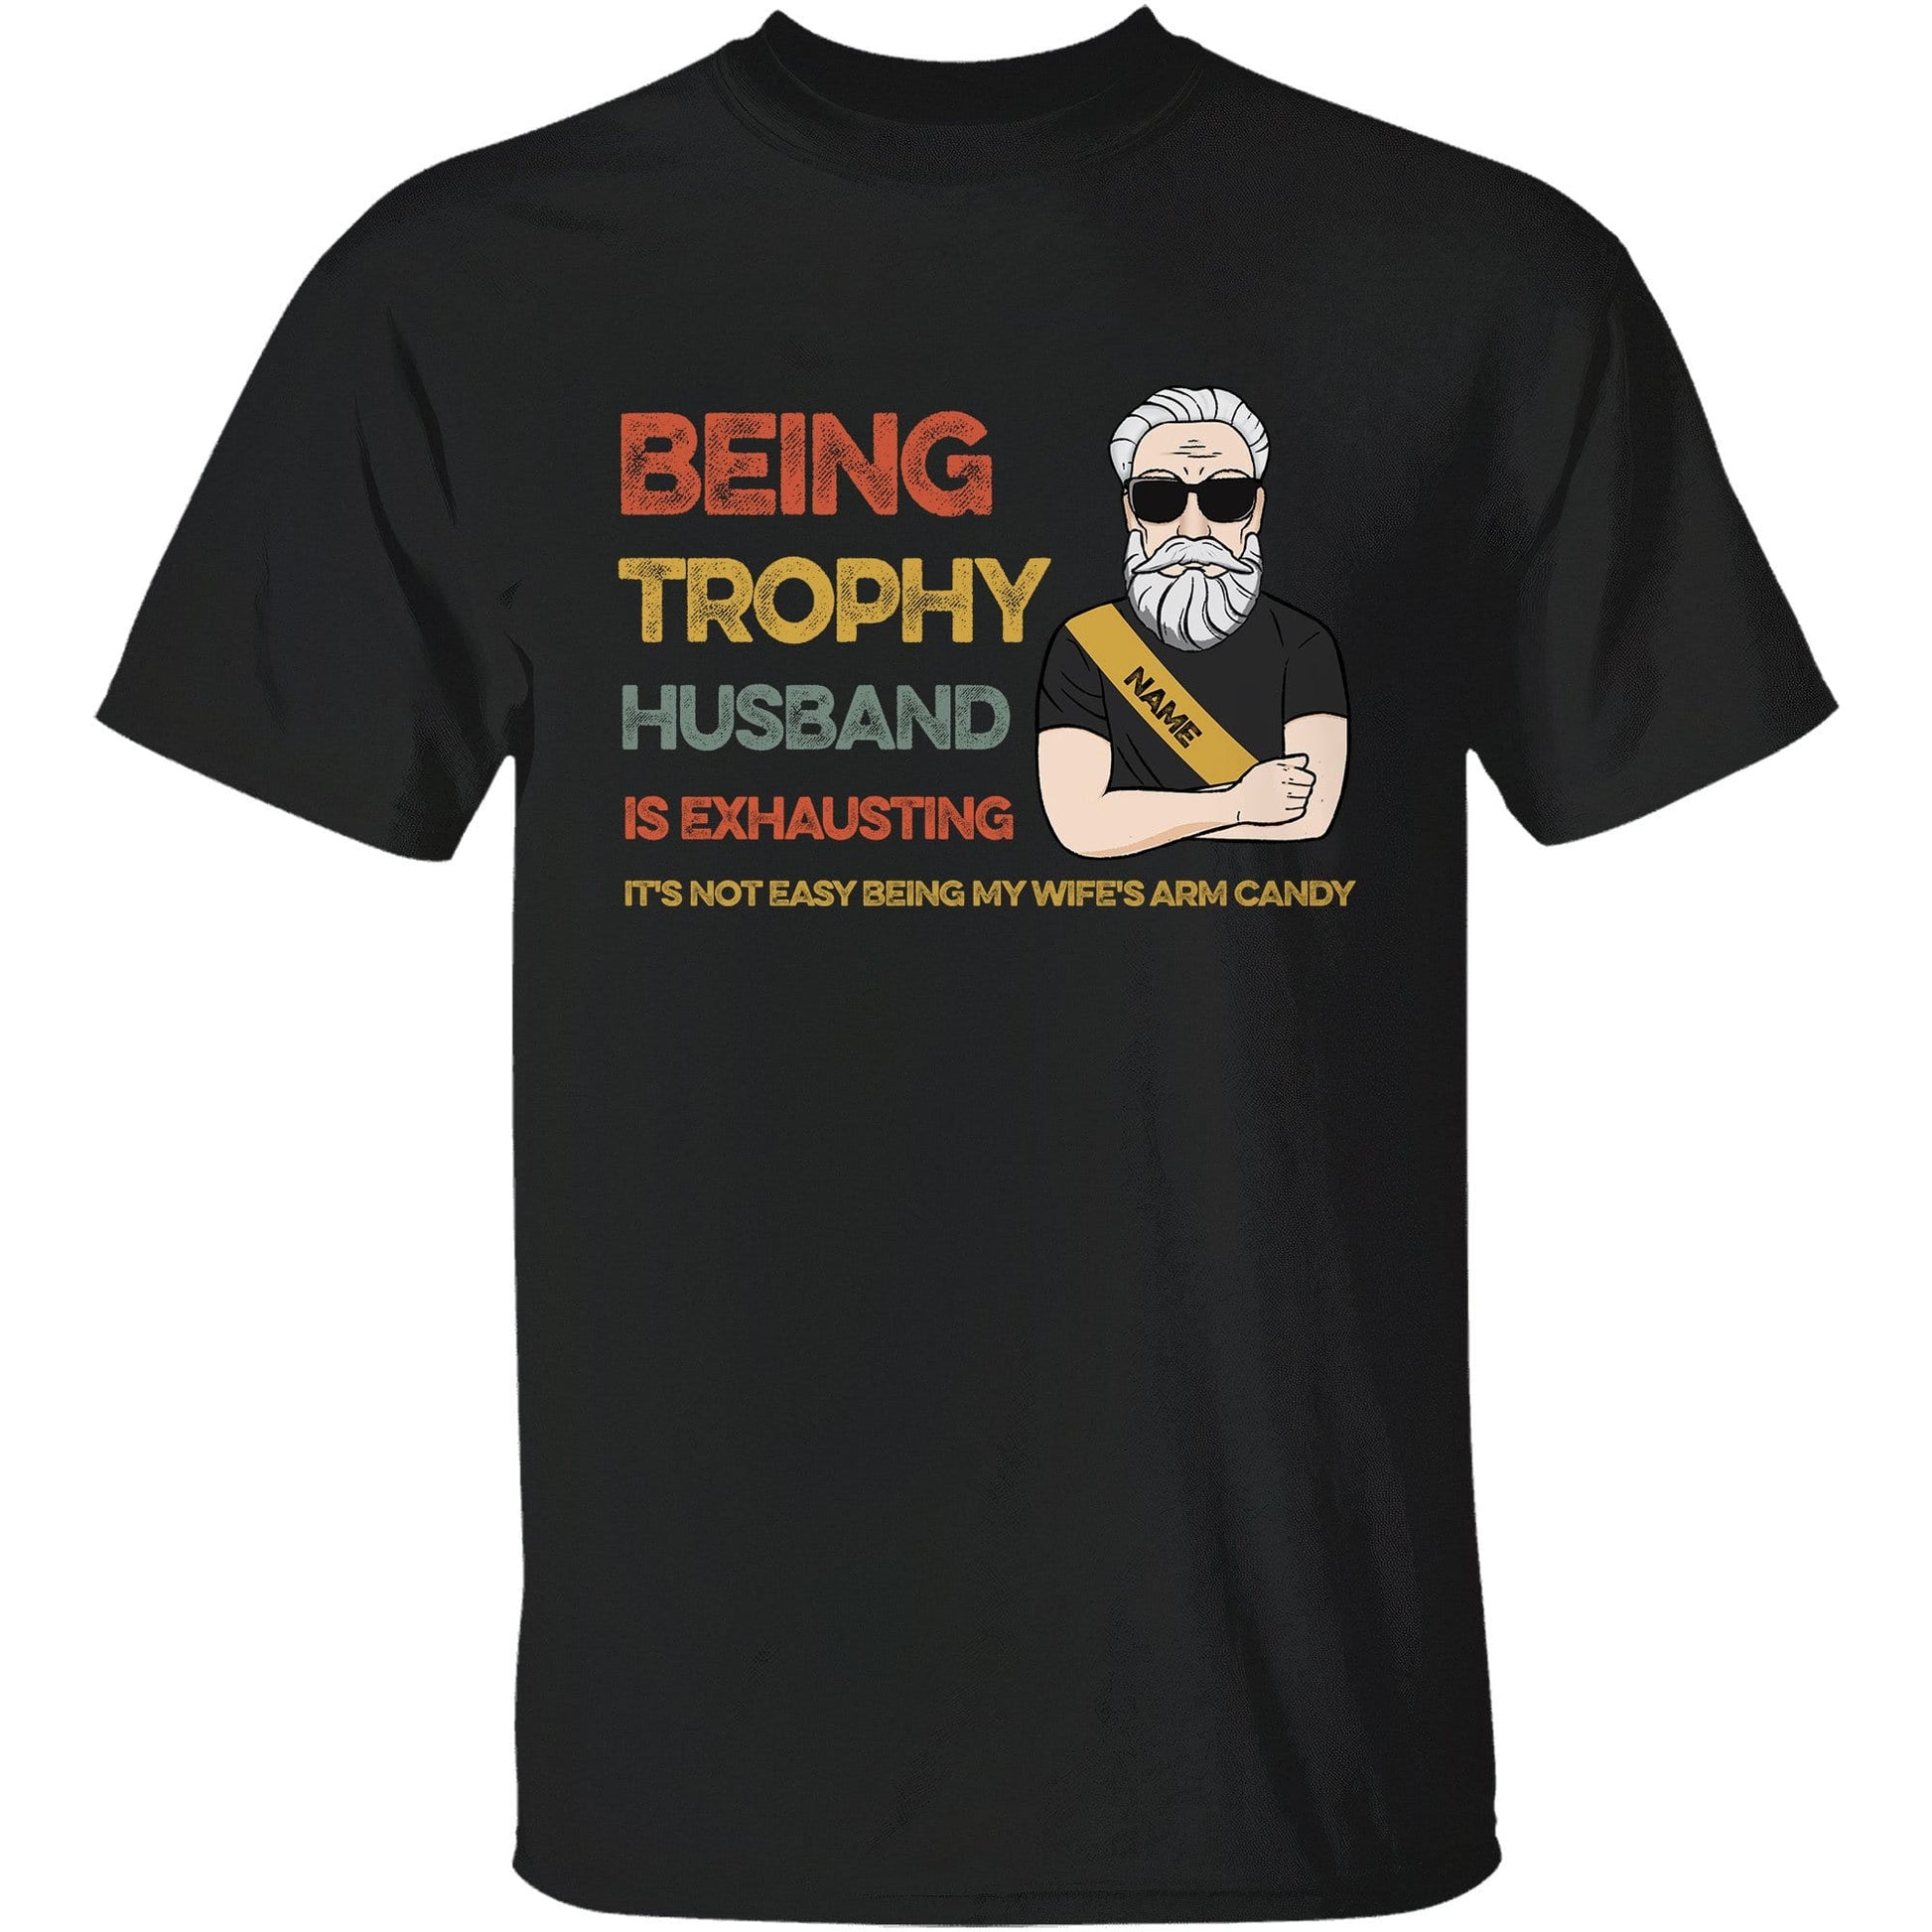 Being Trophy Husband Is Exhausting It's Not Easy Being My Wife's Arm Candy Shirt-Macorner